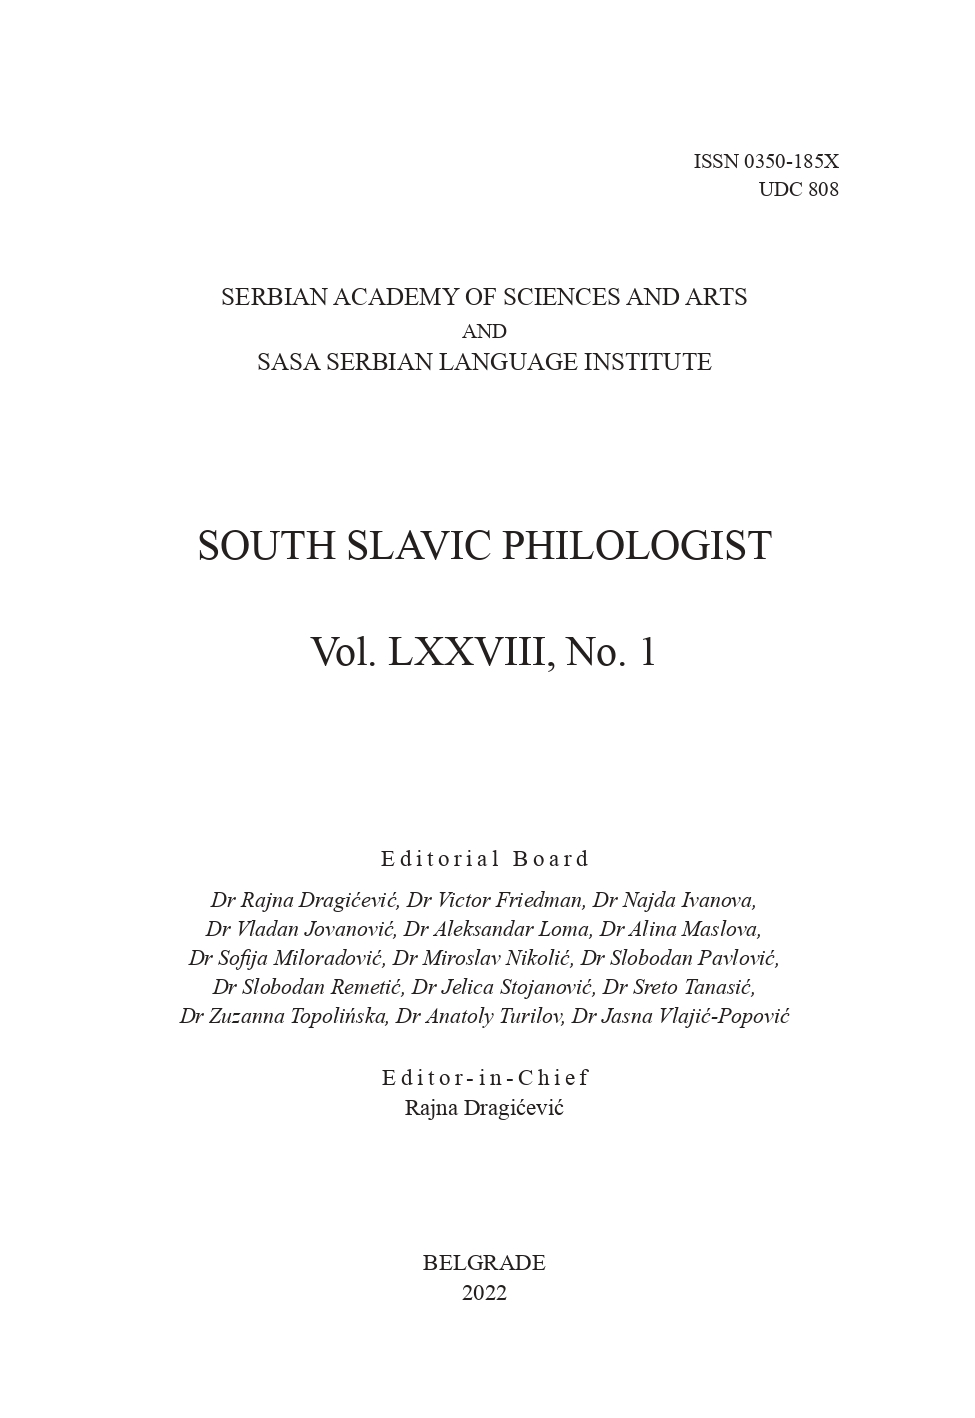 Scientific meeting Current issues of Serbian orthography: New contributions to Serbian orthography 2. Matica Srpska, Novi Sad, Committee for the Standardization of the Serbian Language, Belgrade, October 23, 2021 Cover Image